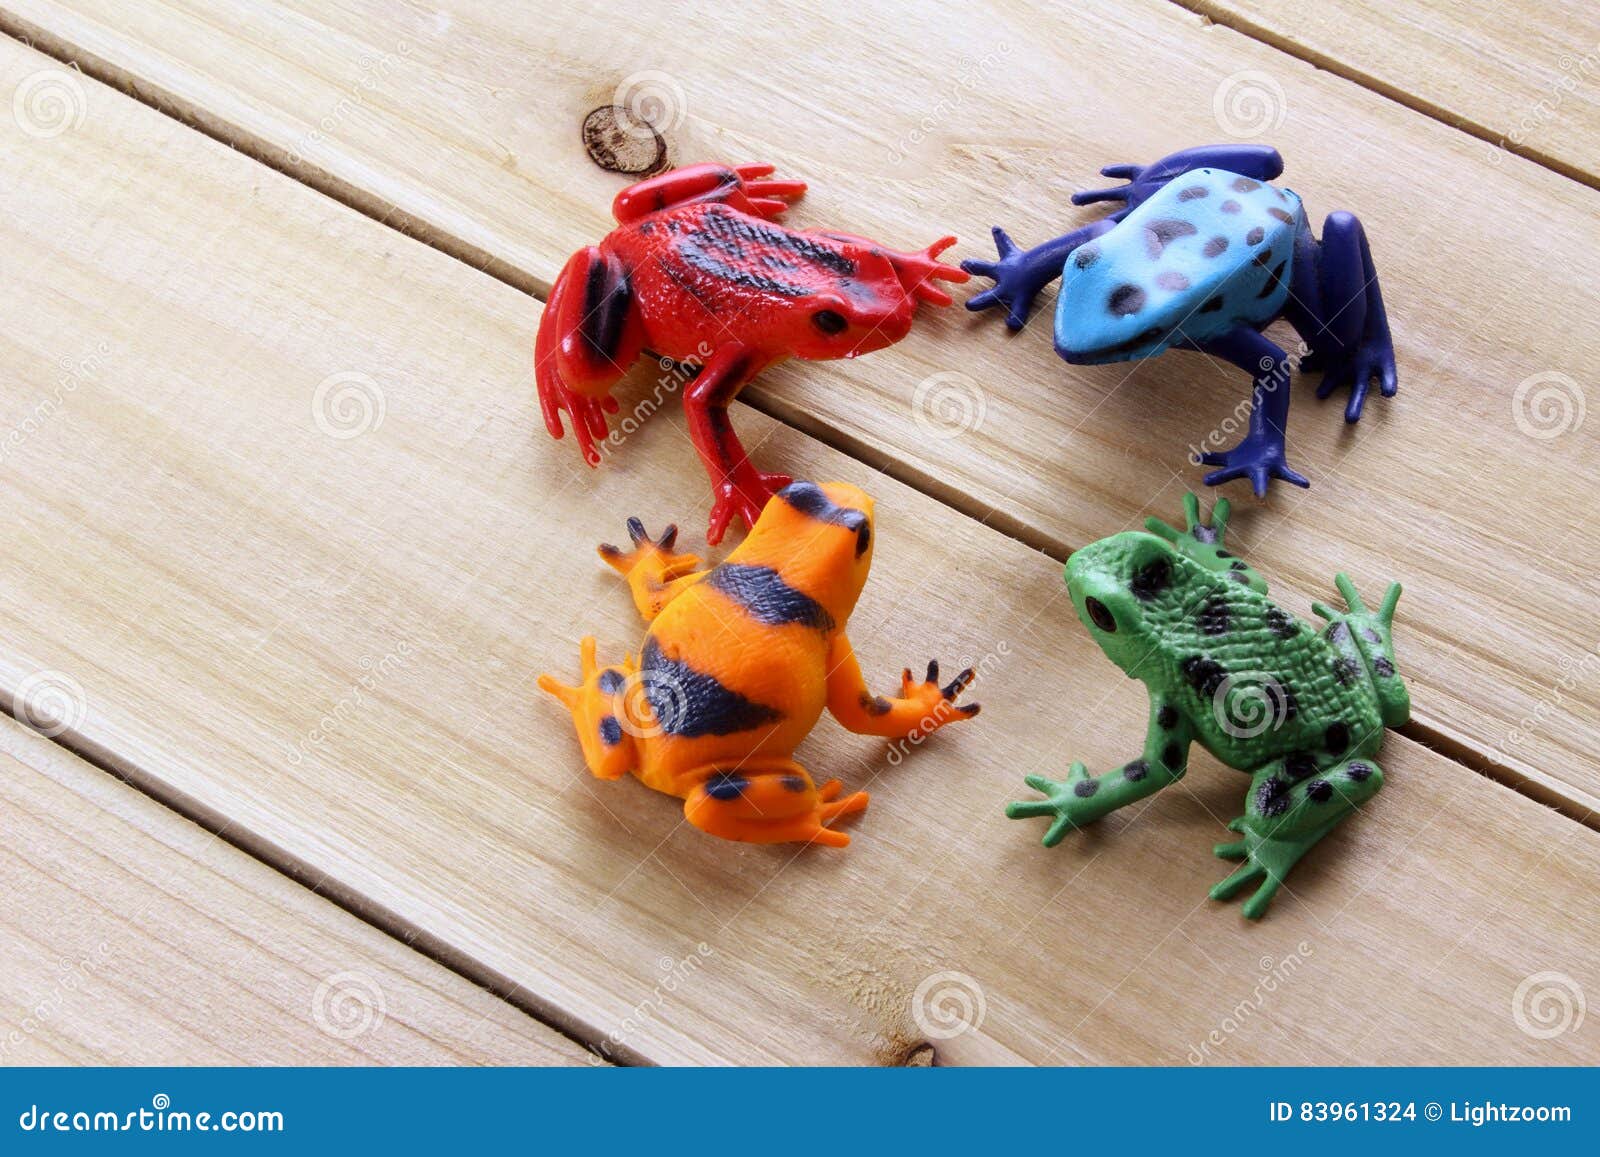 Toy Frogs stock photo. Image of meeting, confrontation - 83961324